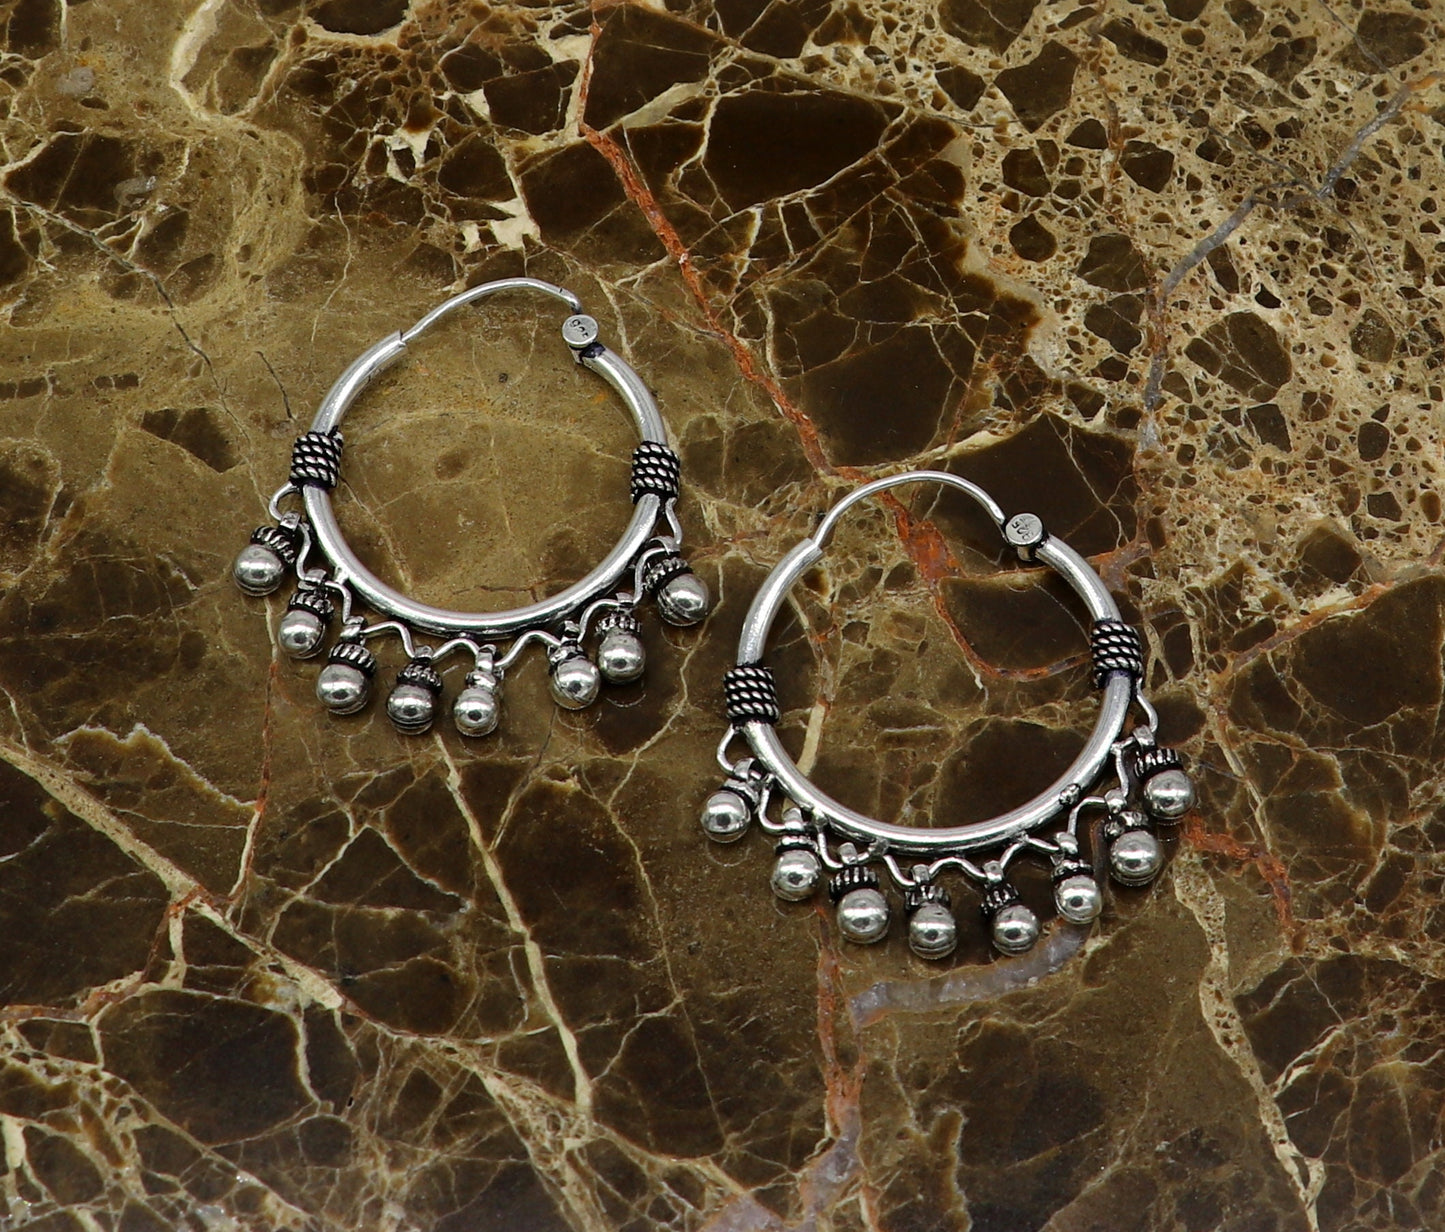 Genuine 925 Sterling silver handmade fabulous hoops earrings with hanging bells amazing antique earrings jewelry for girl's ear545 - TRIBAL ORNAMENTS